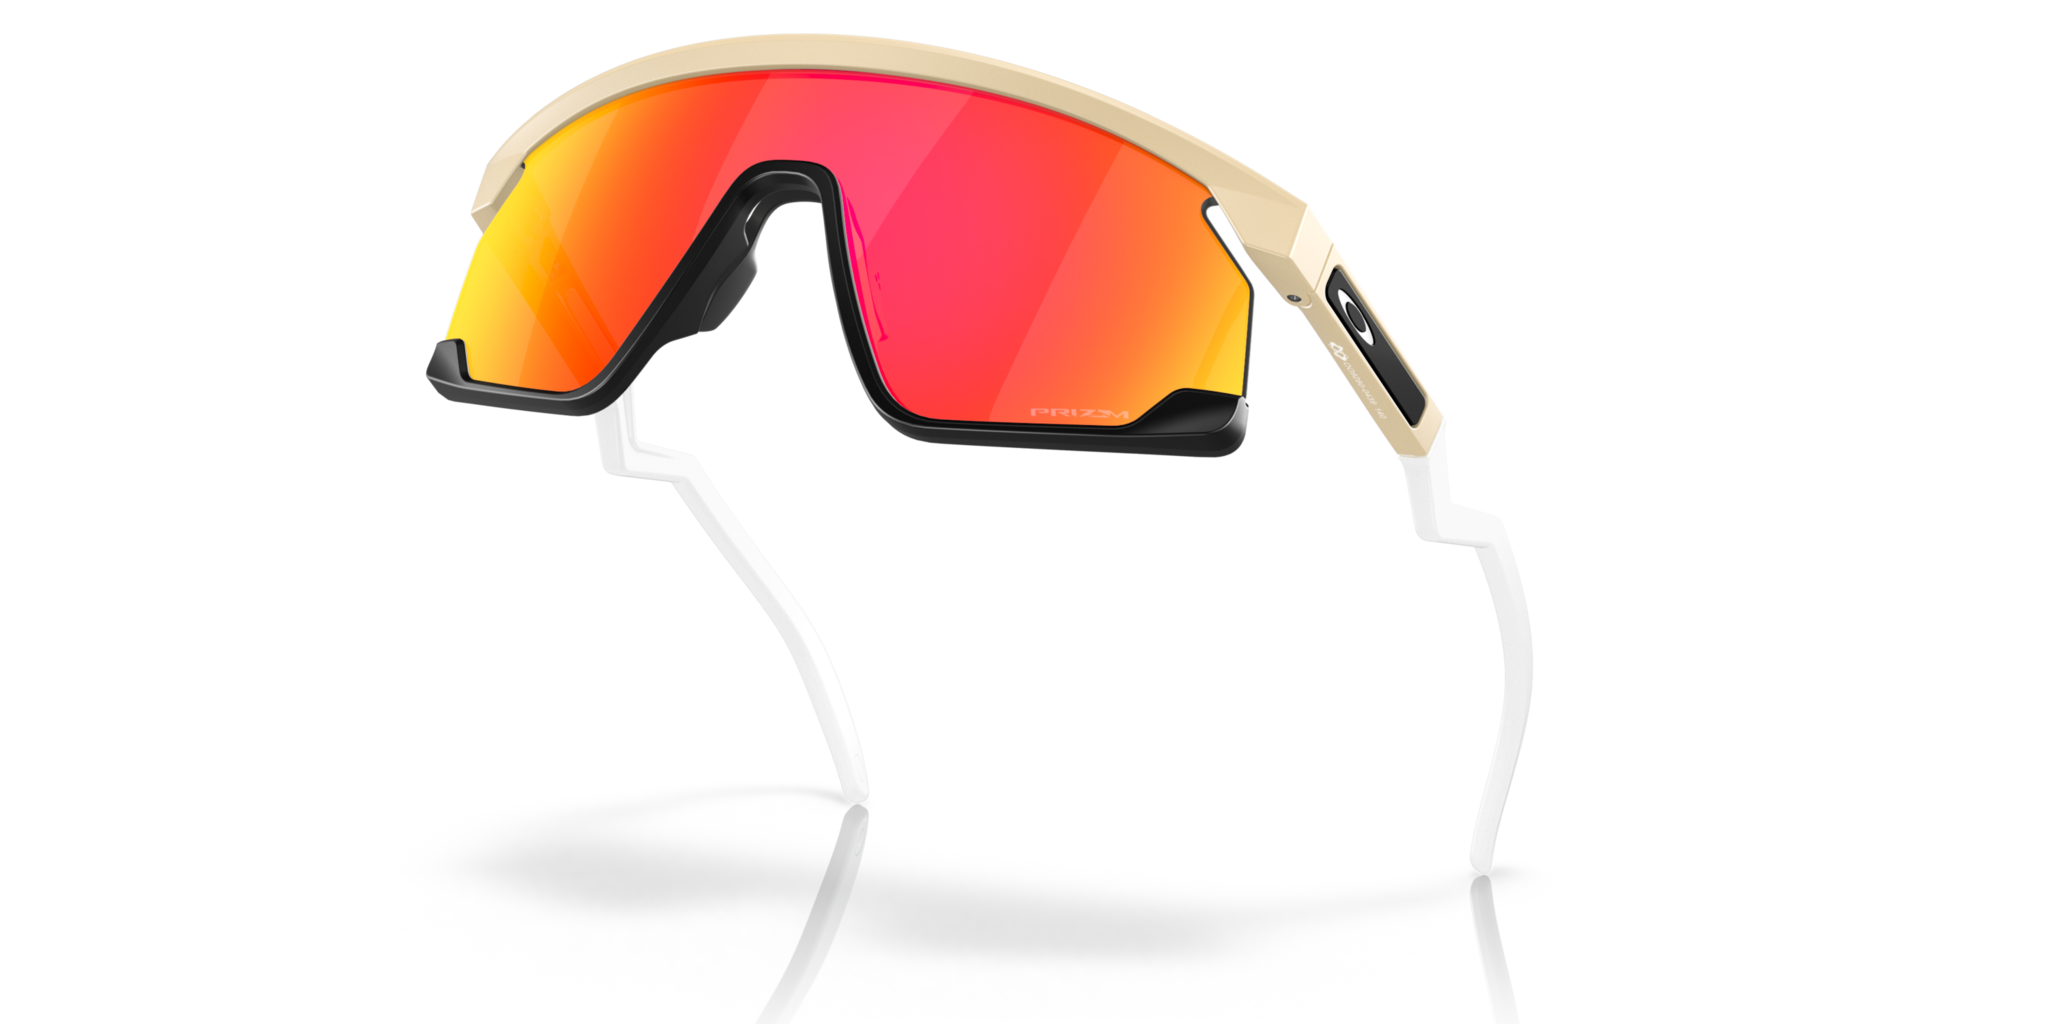  Tintart Performance Replacement Lenses Compatible with Oakley  Juliet - HD Trail Ruby : ביגוד, נעליים ותכשיטים